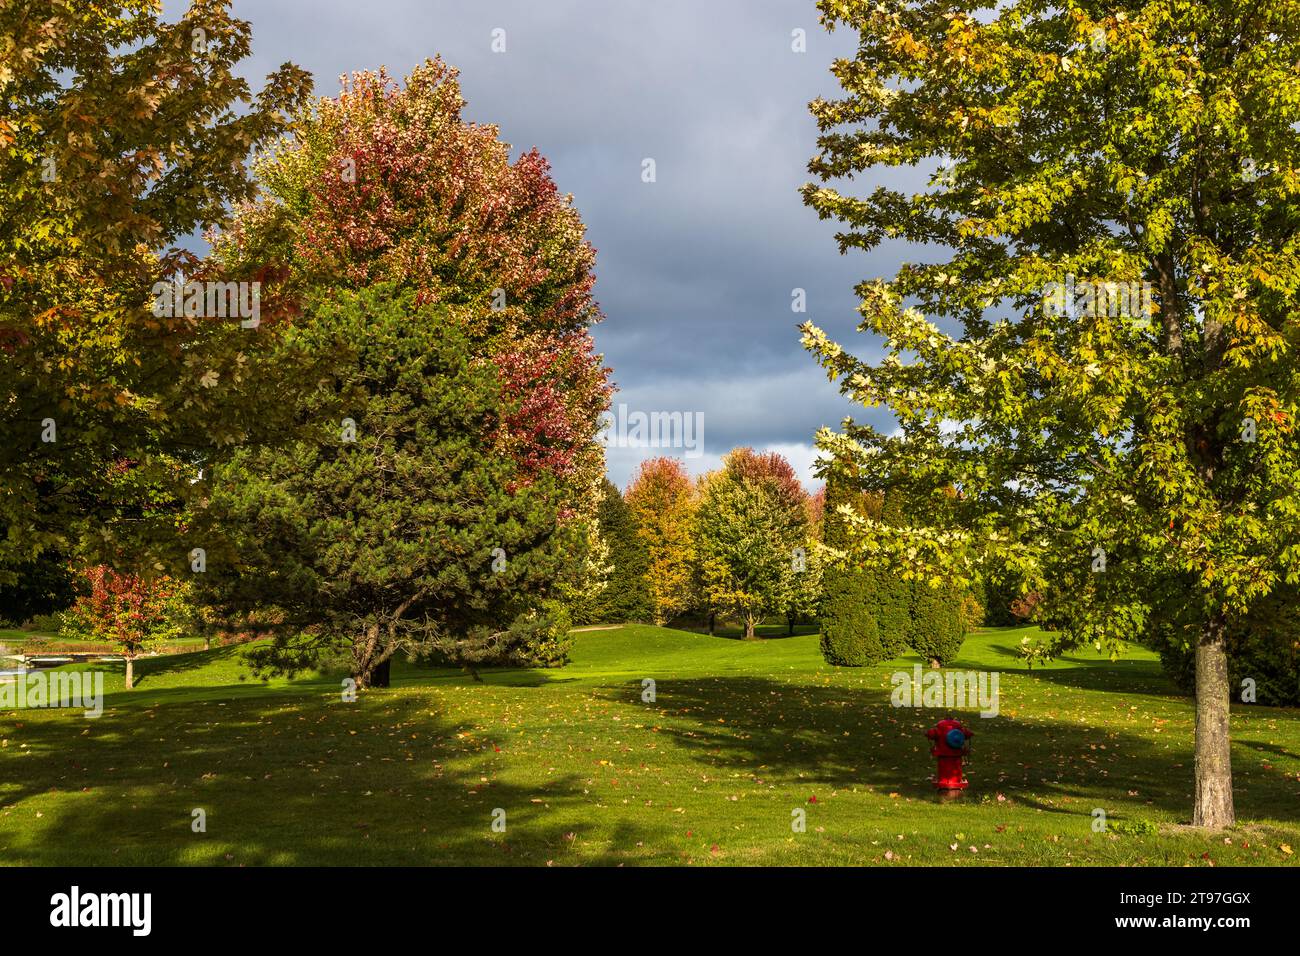 Woodlands at the Grand Hotel Mackinac Island. Trees in autumnal colors and a small red water hydrant on the meadow. Indian summer in Mackinac Island Park. Mackinac Island, Michigan, United States Stock Photo